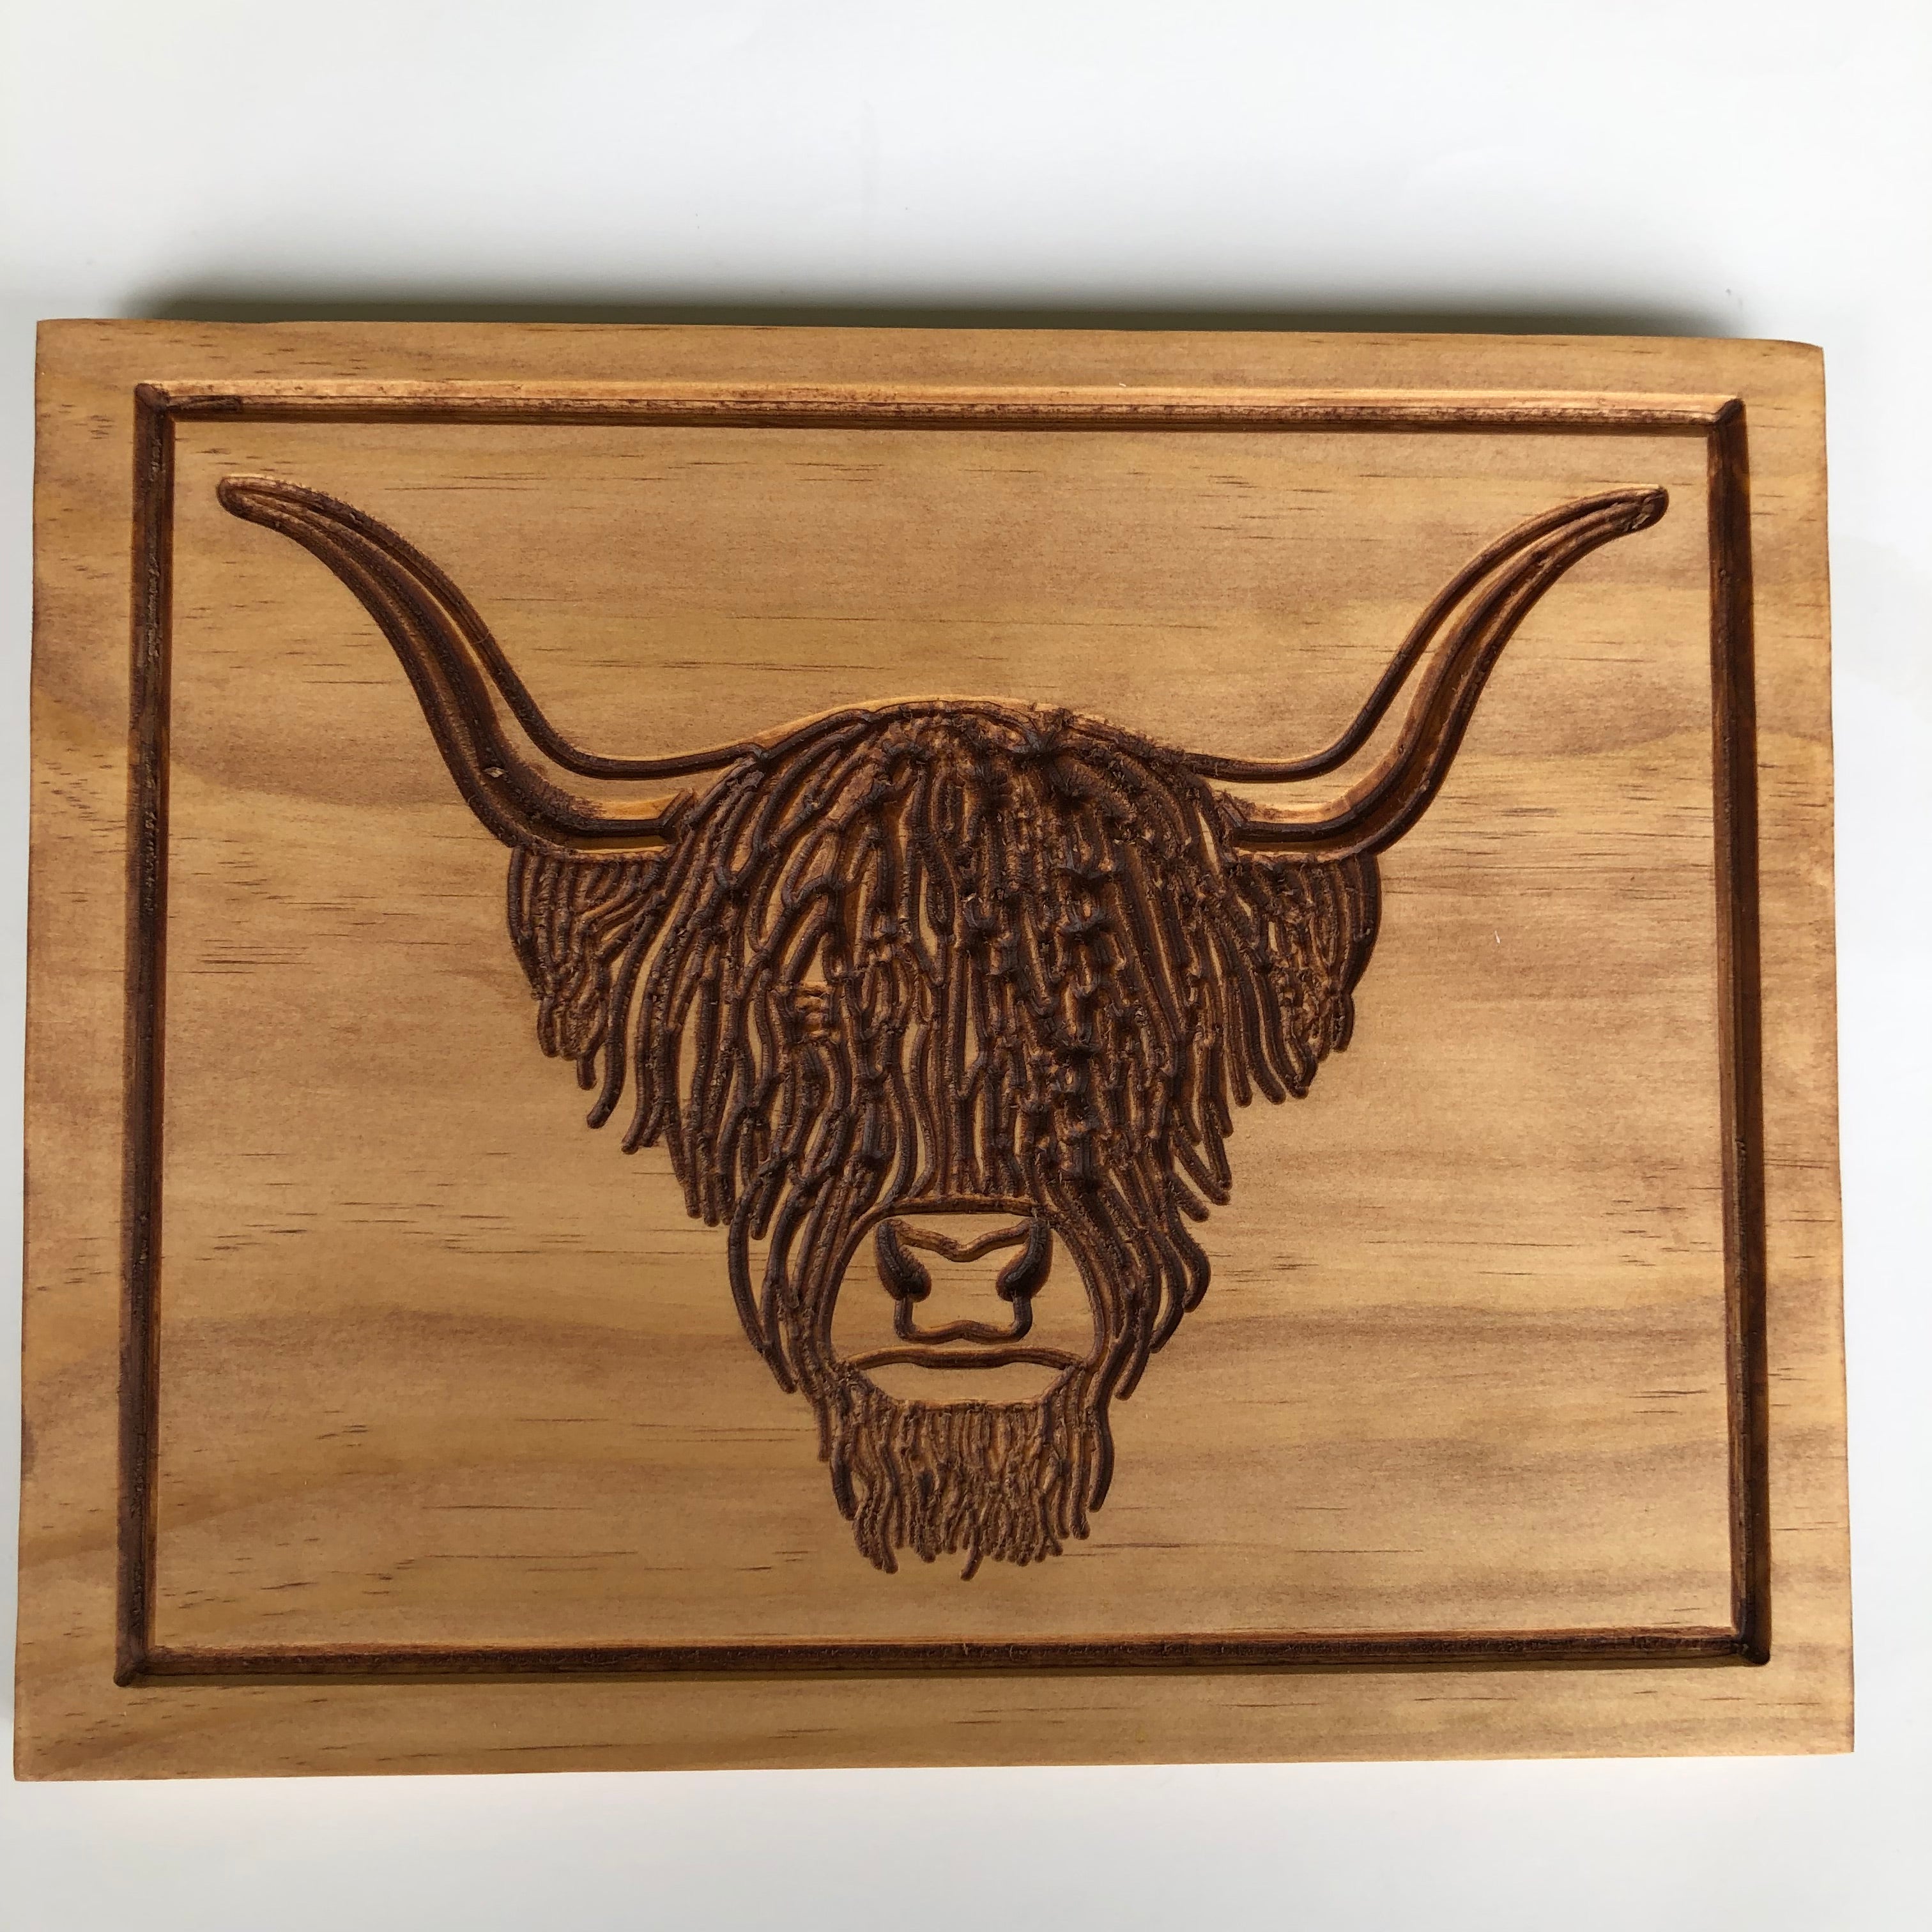 Scottish Highland Cow Wooden Wall Plaque